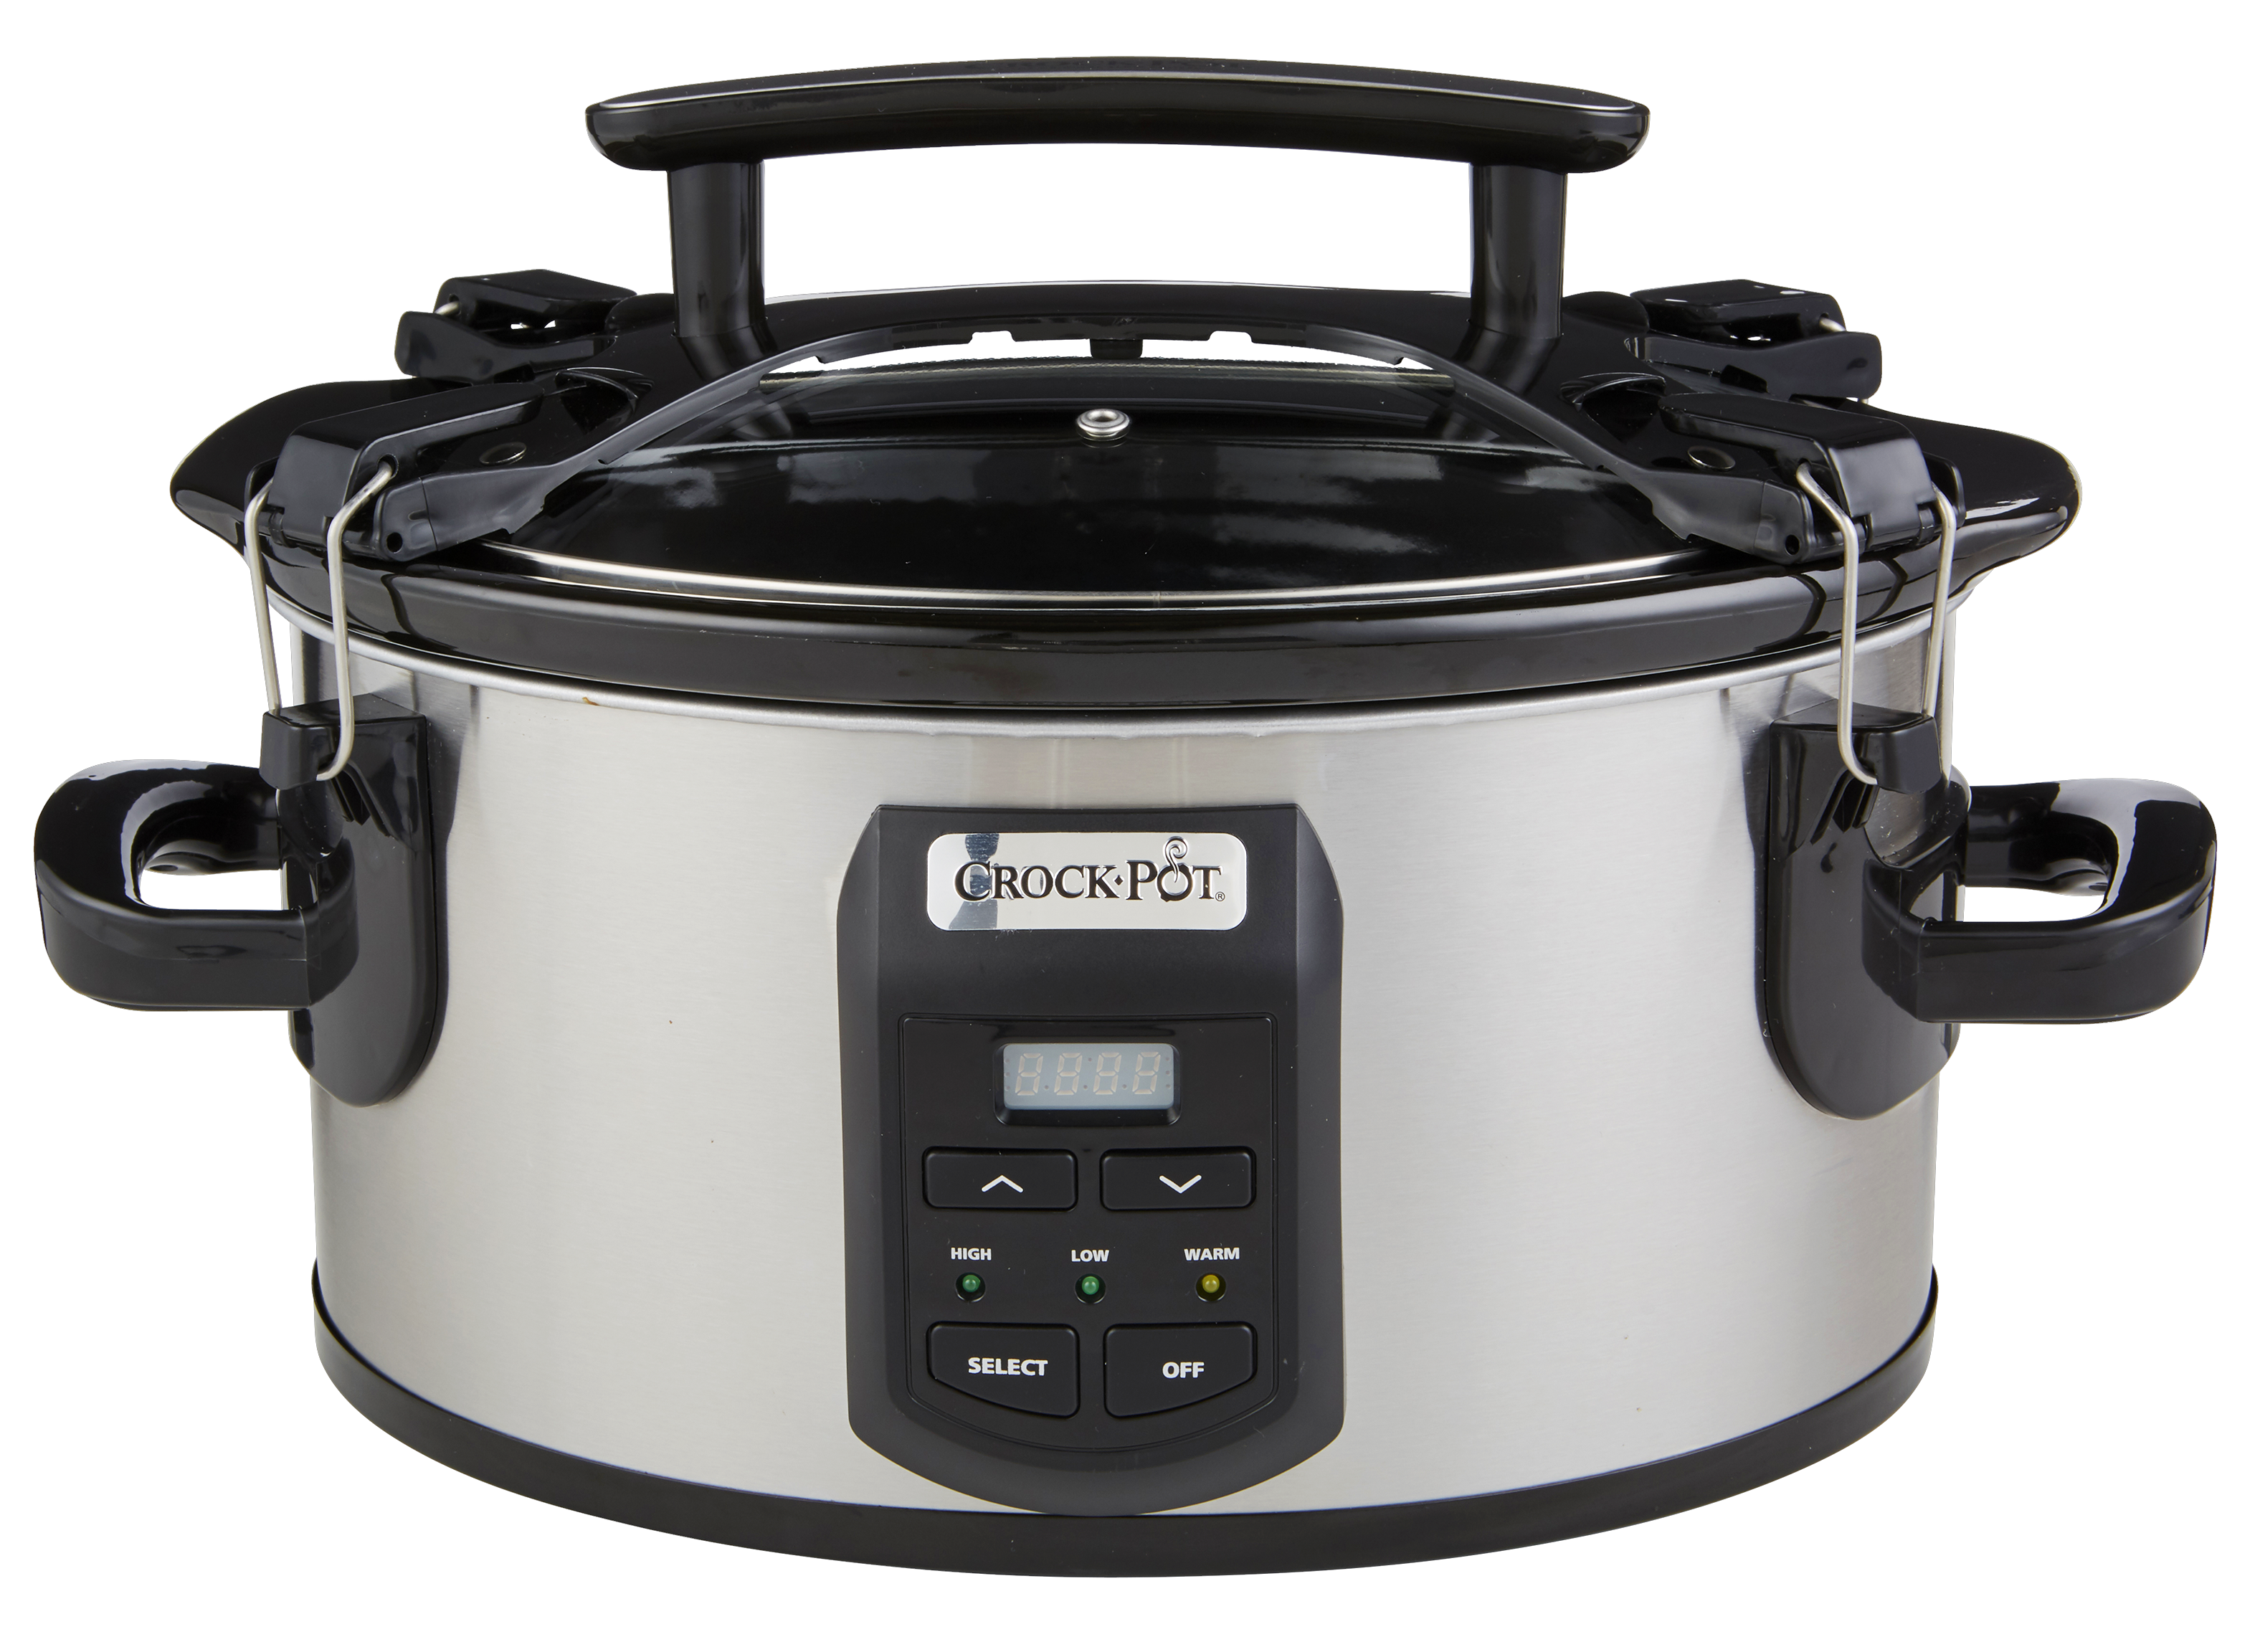 Crock-Pot Cook & Carry SCCPVS600ECP-S Slow Cooker Review - Consumer Reports